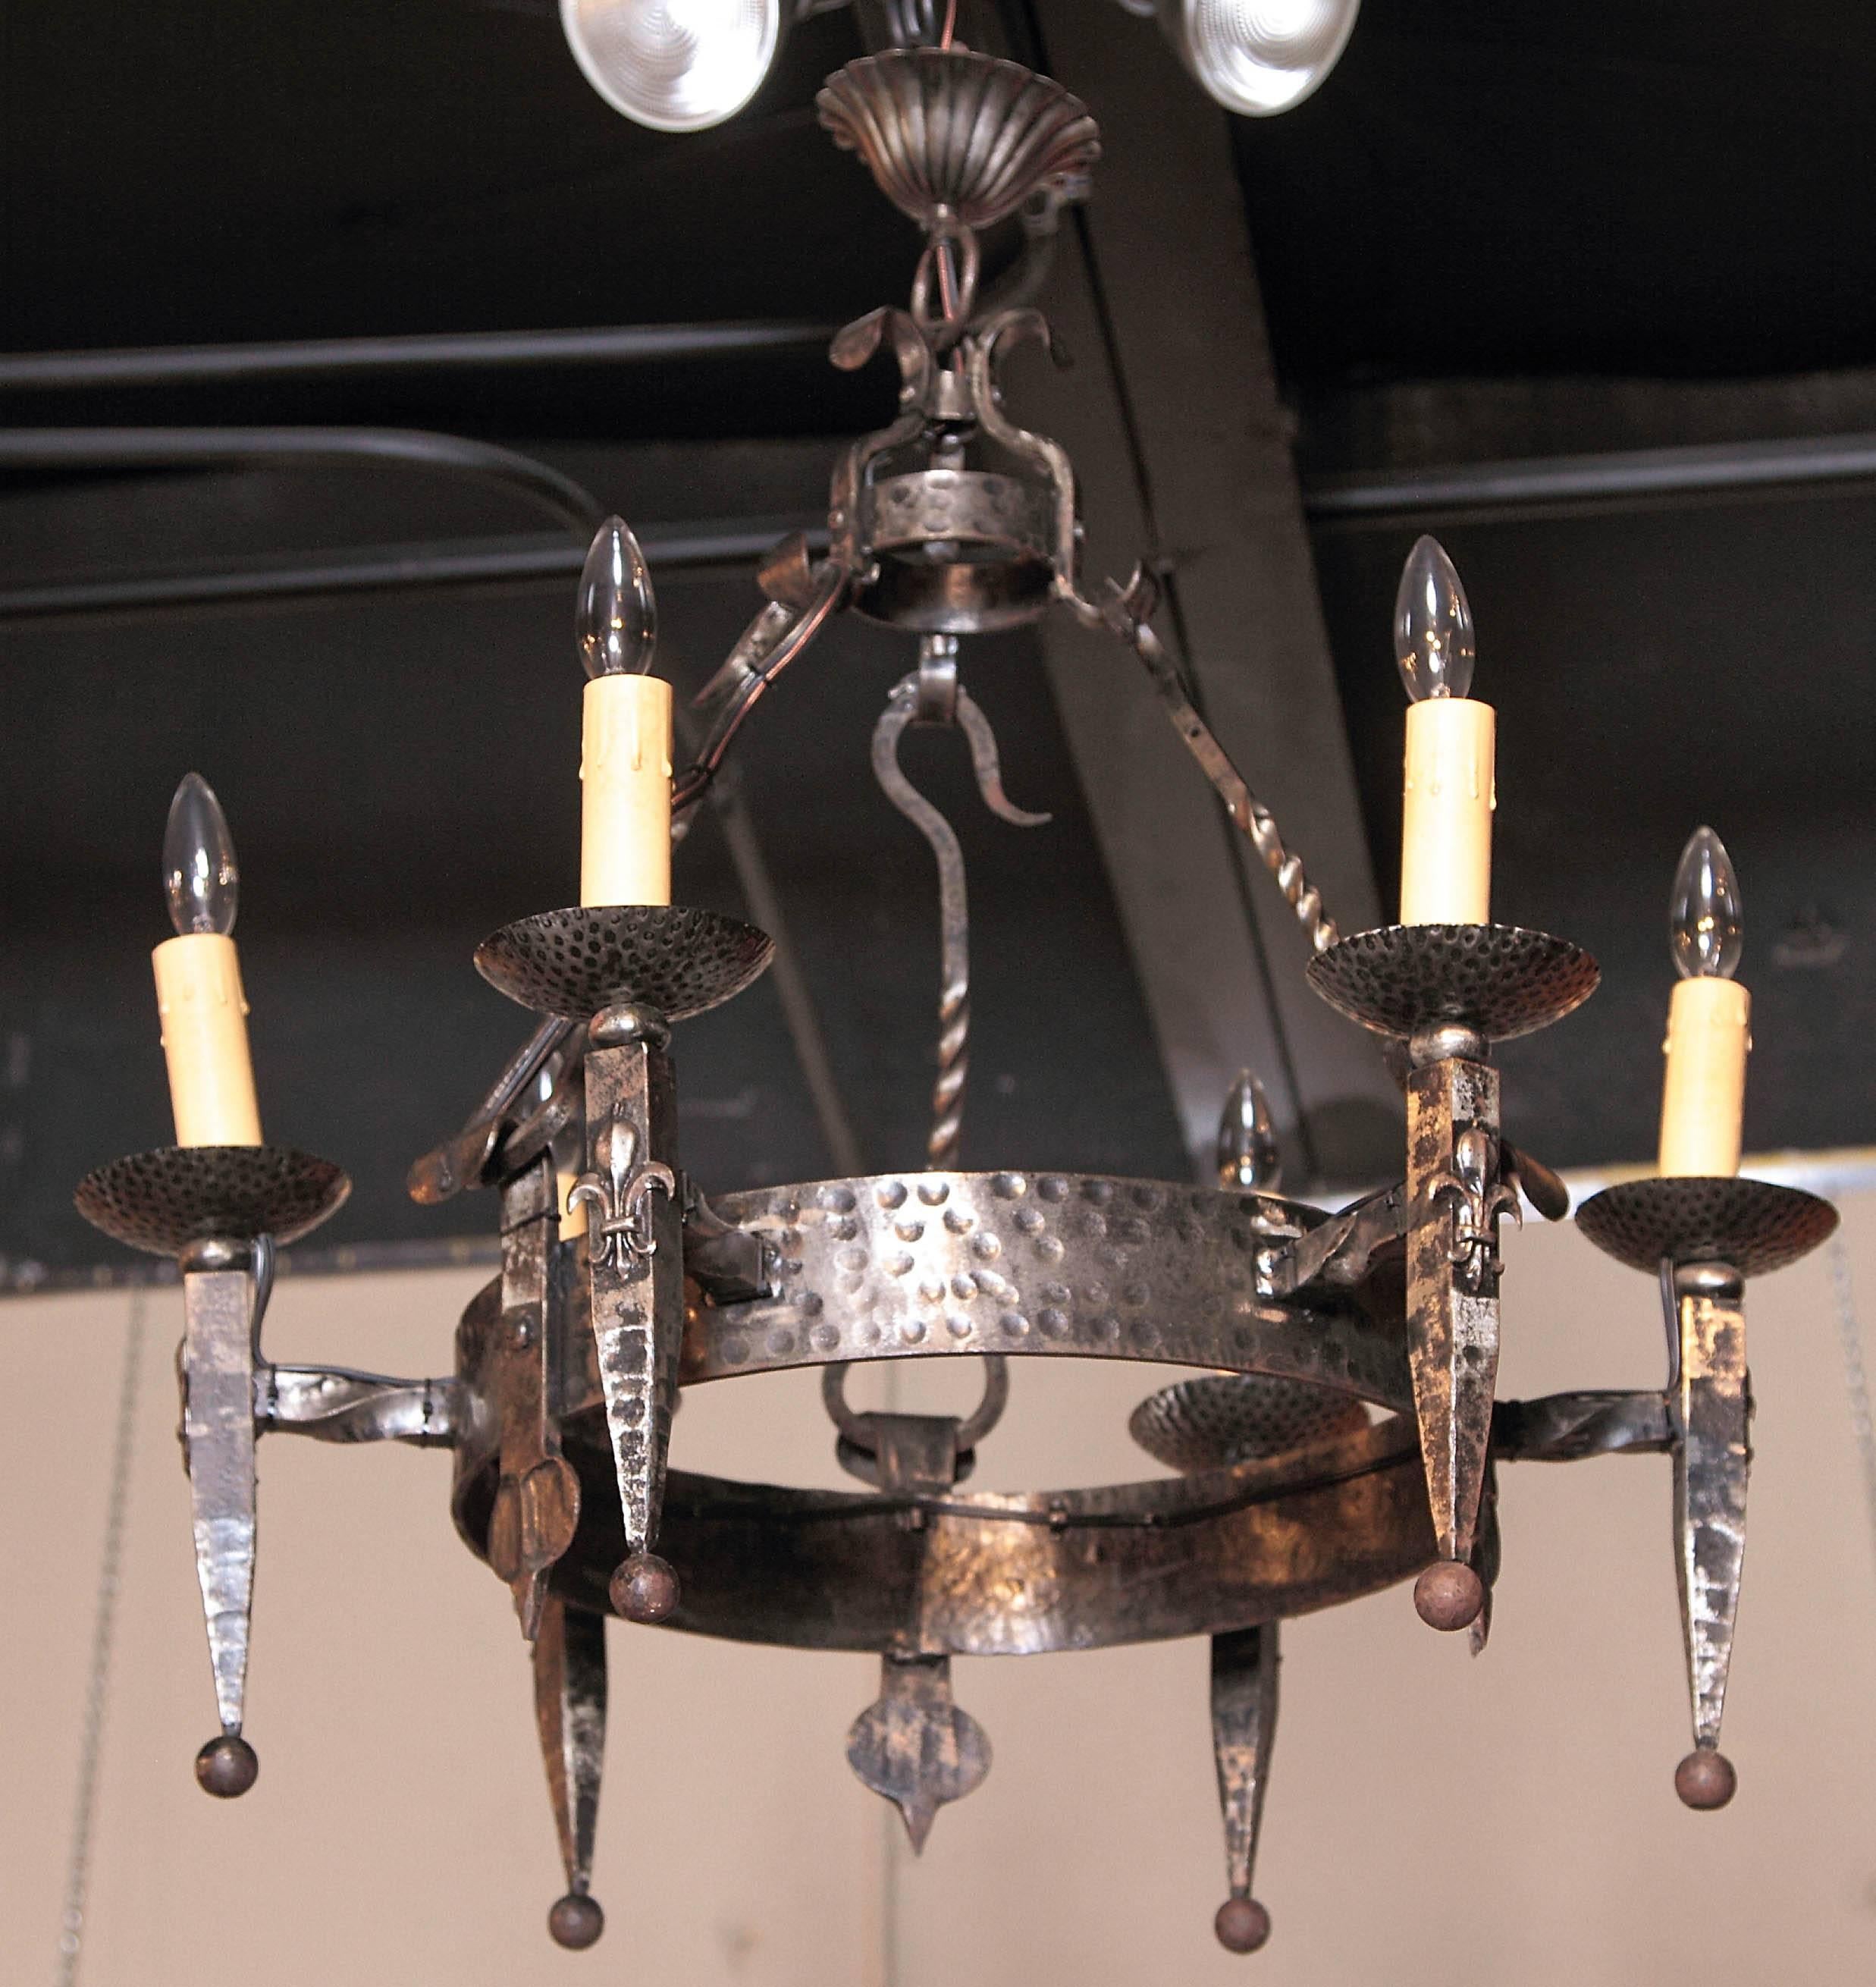 Gothic Early 20th Century French Polished Iron Six-Light Chandelier with Fleur-de-Lys